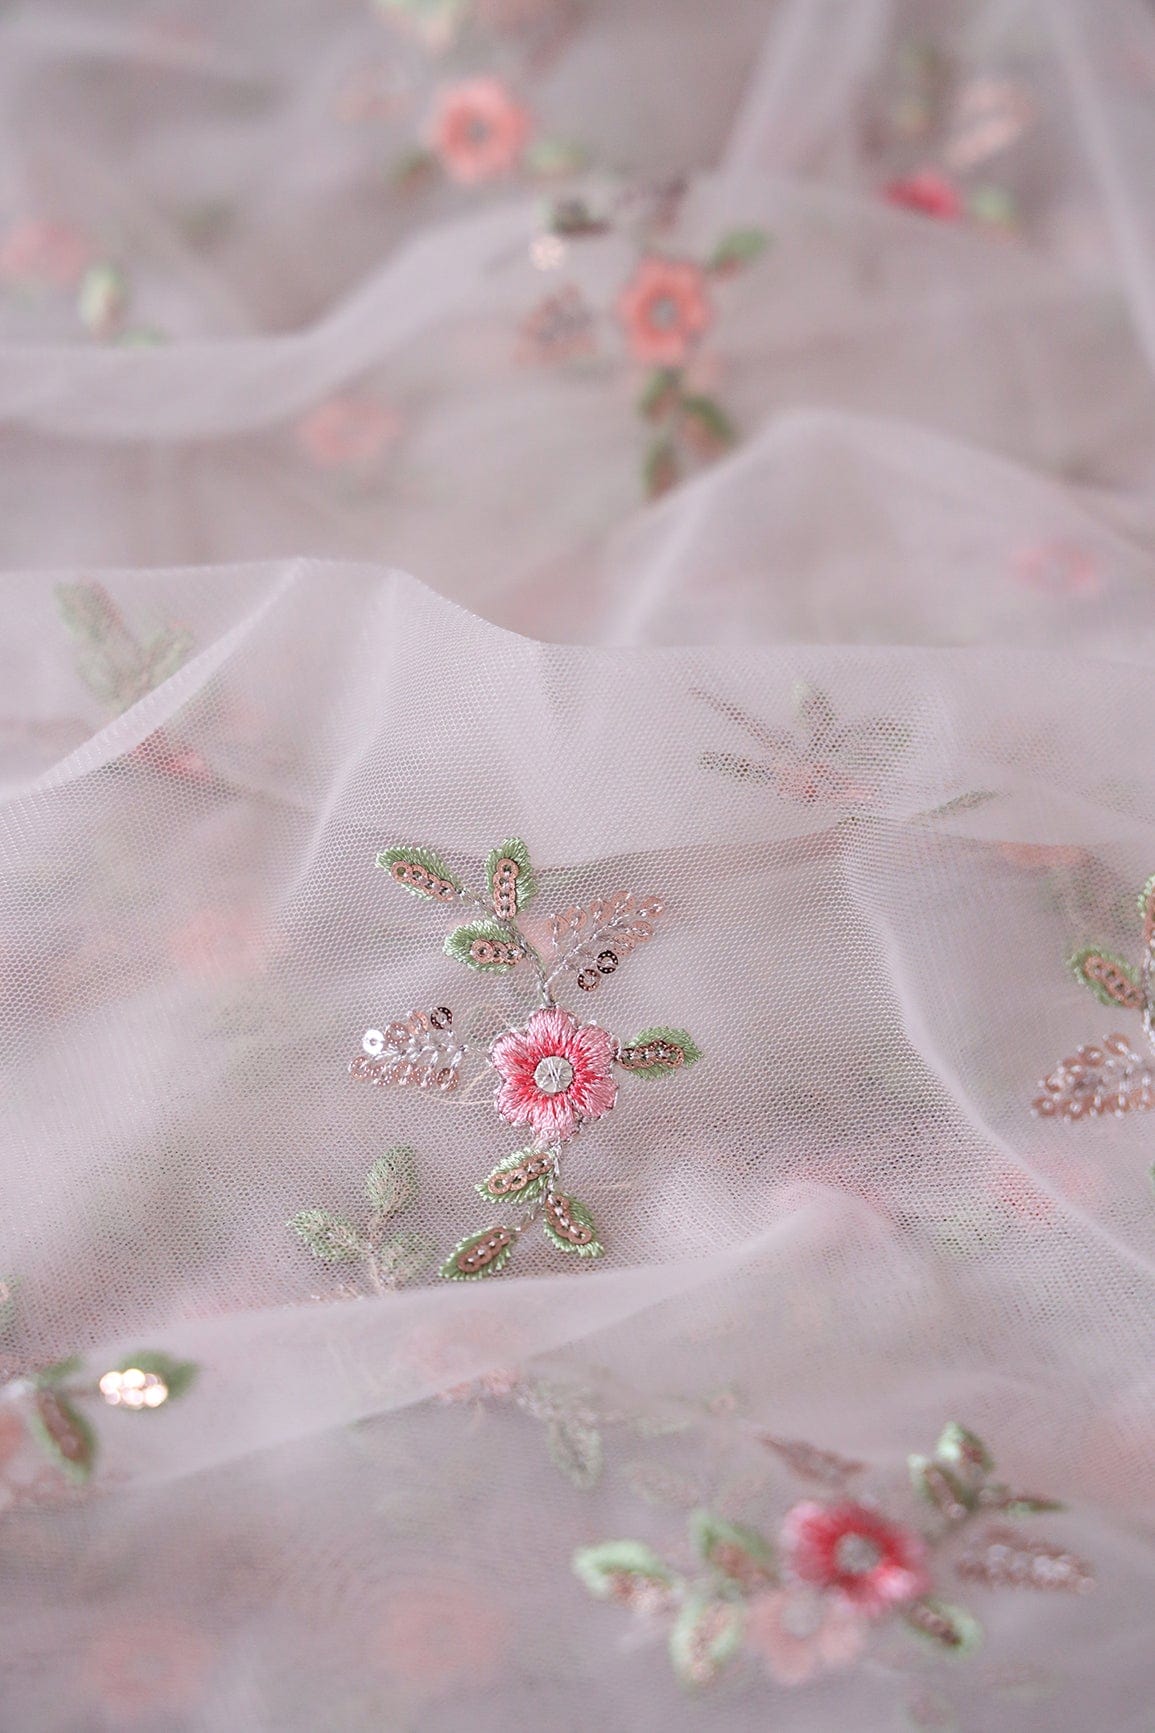 doeraa Embroidery Fabrics Olive And Pink Thread With Gold Sequins Floral Butta Embroidery On Pastel Grey Soft Net Fabric